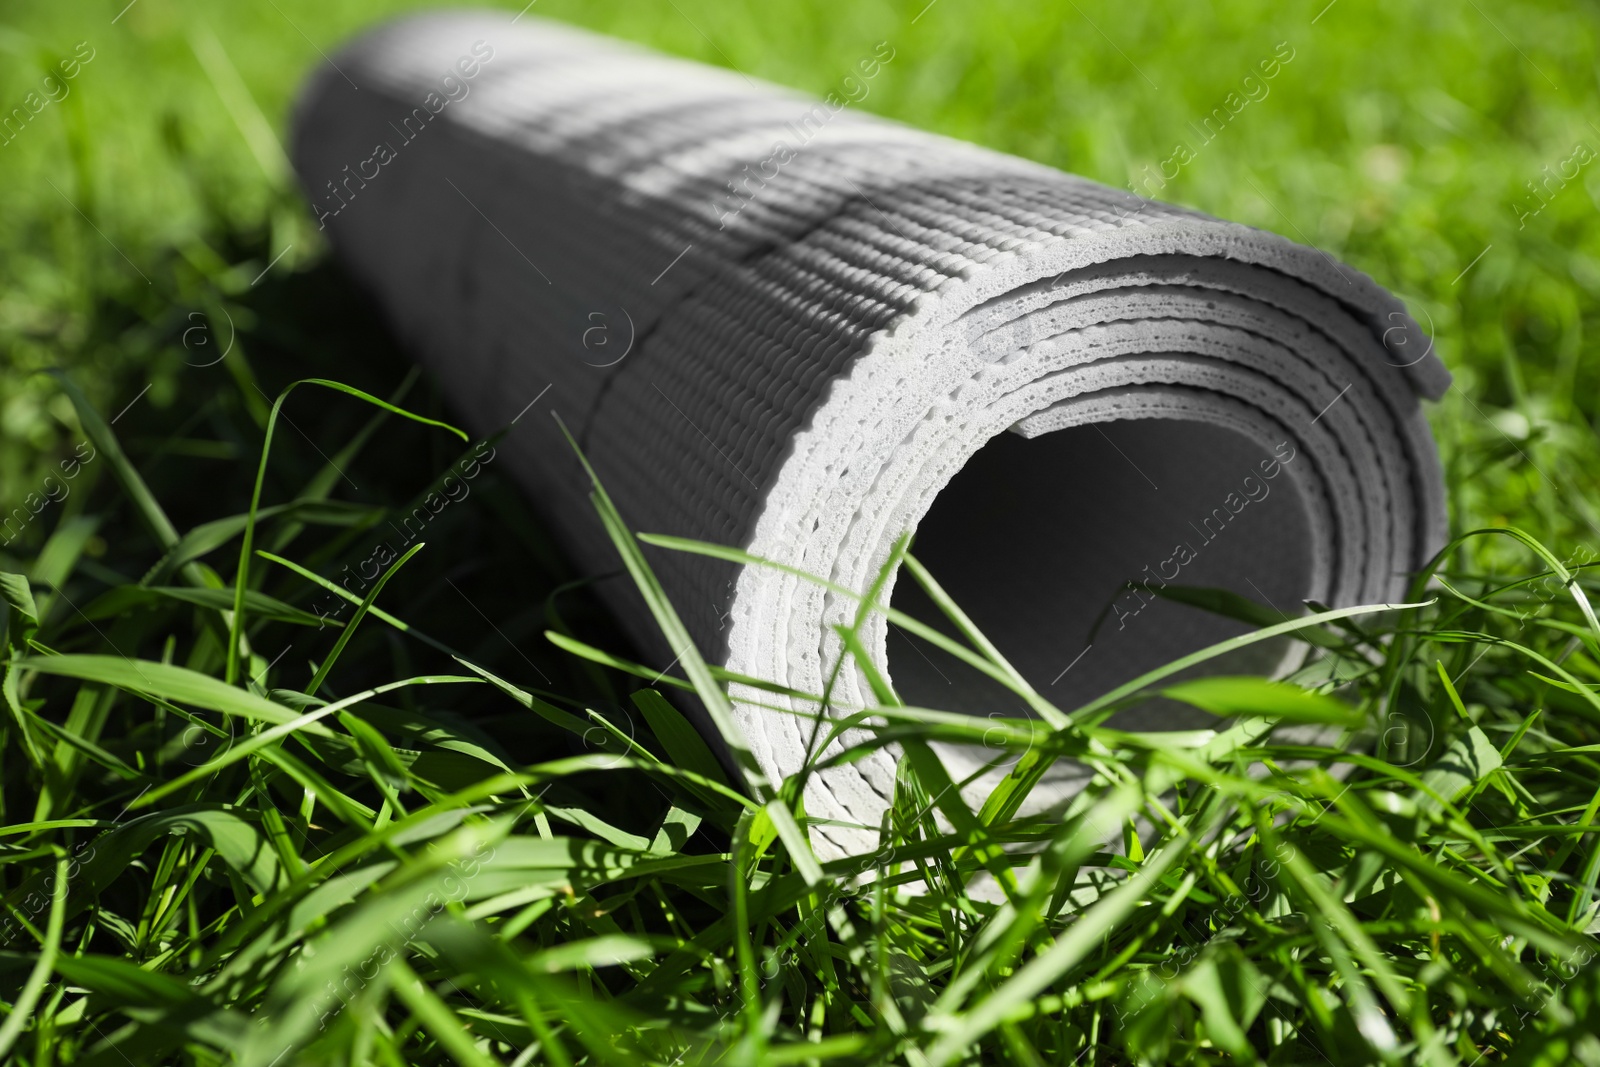 Photo of Rolled karemat or fitness mat on green grass outdoors, closeup. Space for text